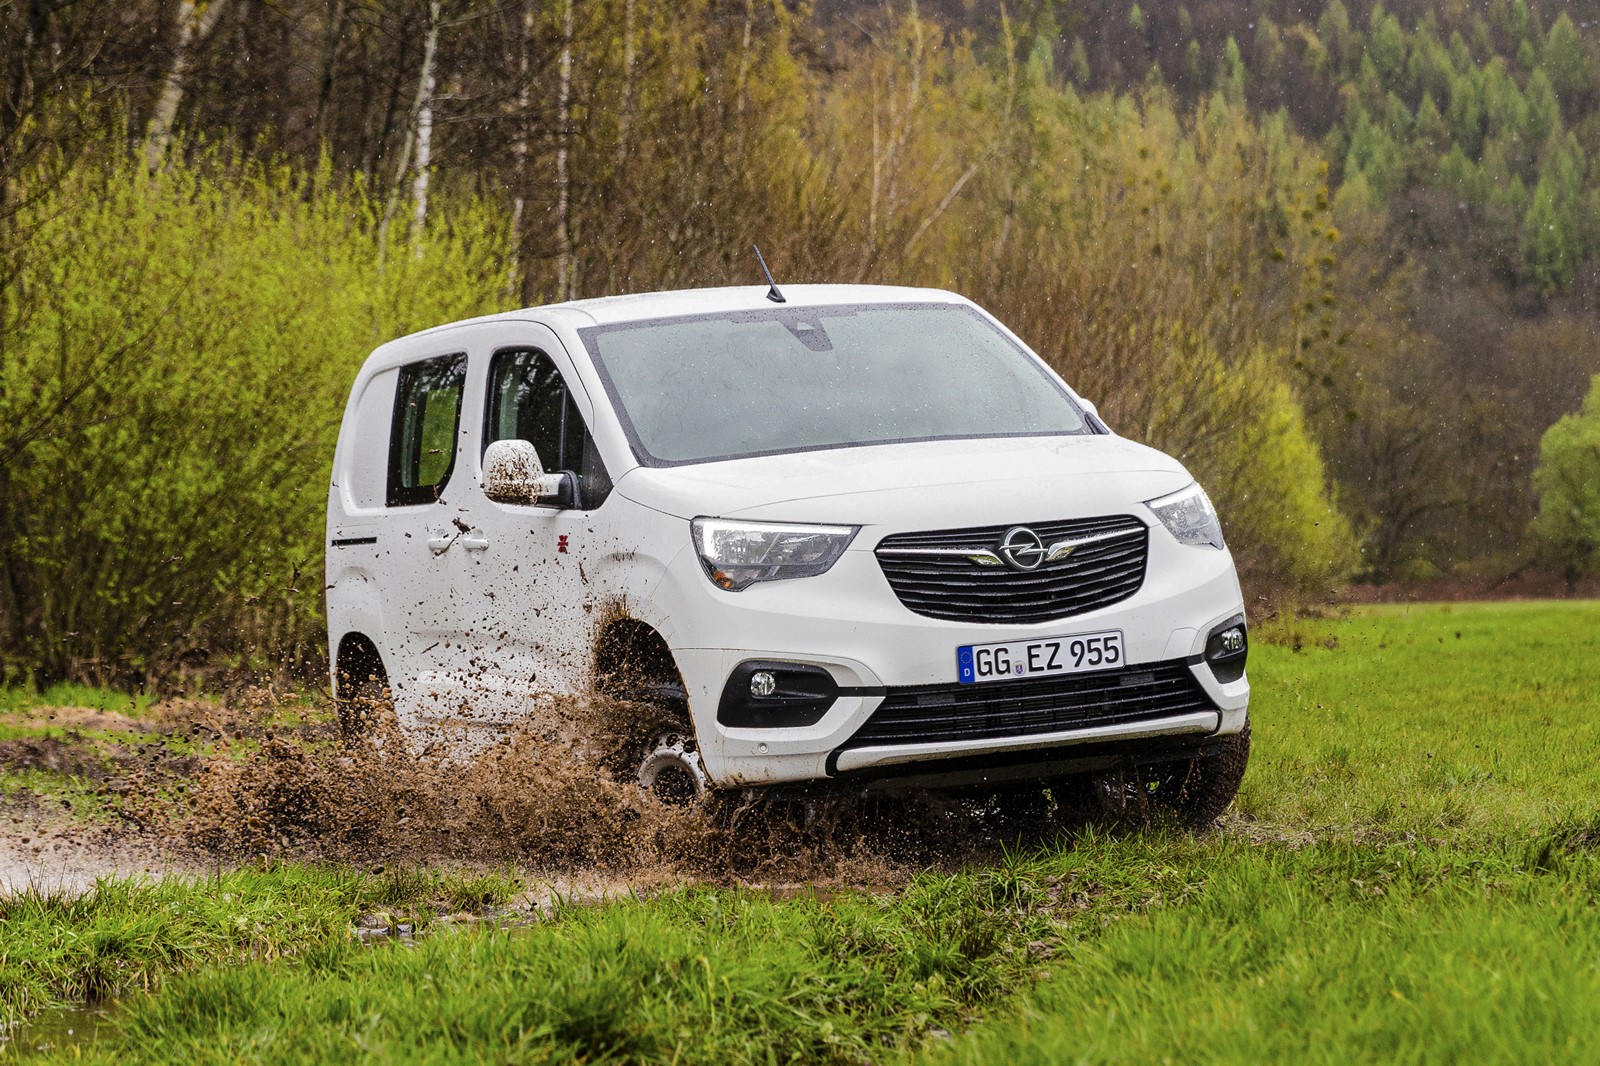 Opel Combo Cargo and Vivaro now available with Dangel all-wheel drive